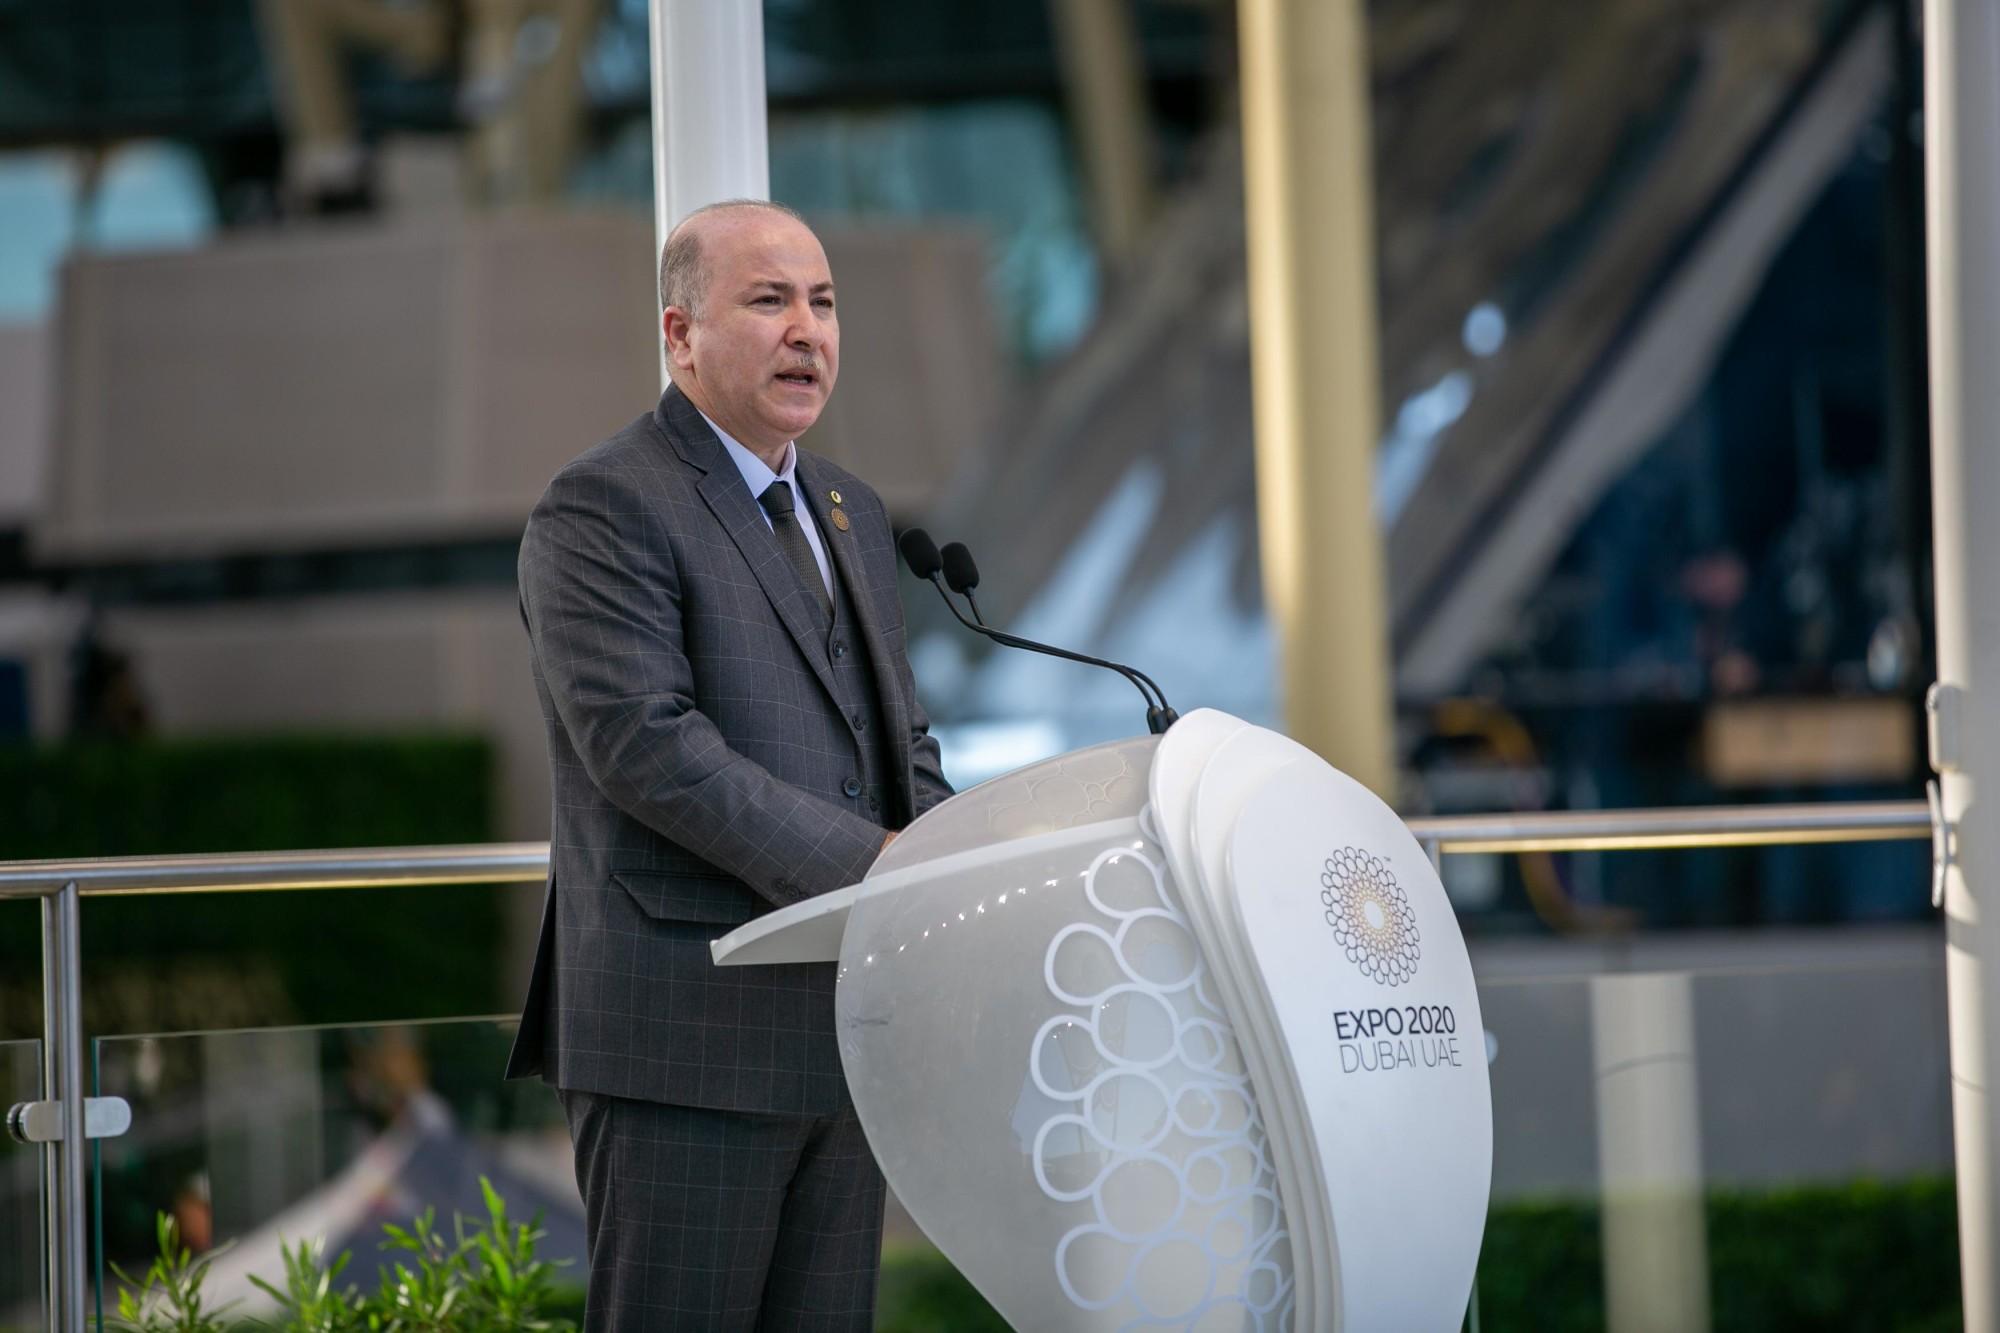 His Excellency Aymen Benabderrahmane, Prime Minister and Minister of Finance speaks during the Algeria National Day Ceremony at Al Wasl Plaza m10503